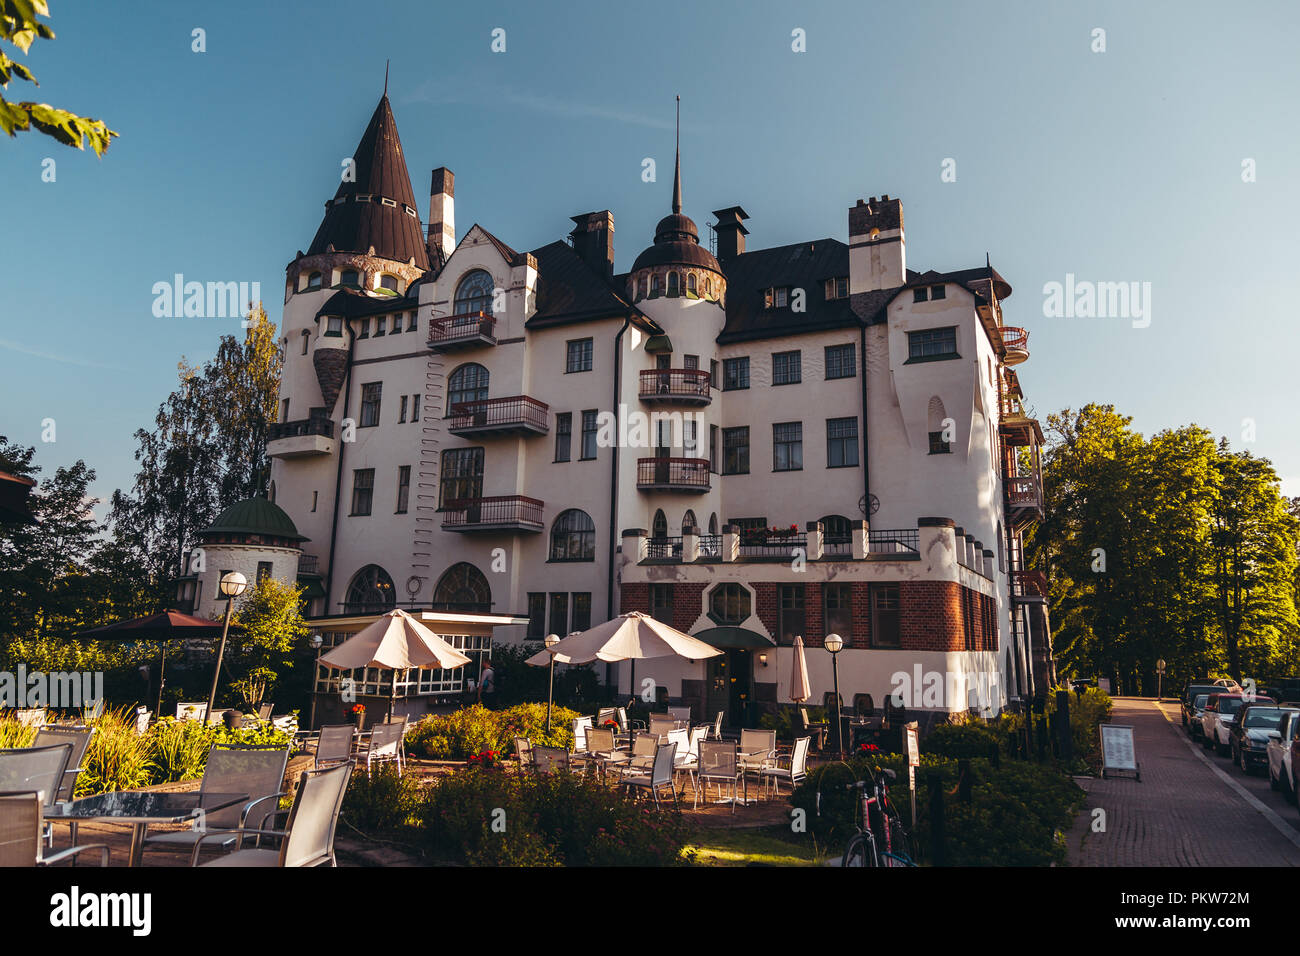 Editorial 07.13.2018 Imatra Finland, Old castle in Imatra that acts as a hotel Stock Photo